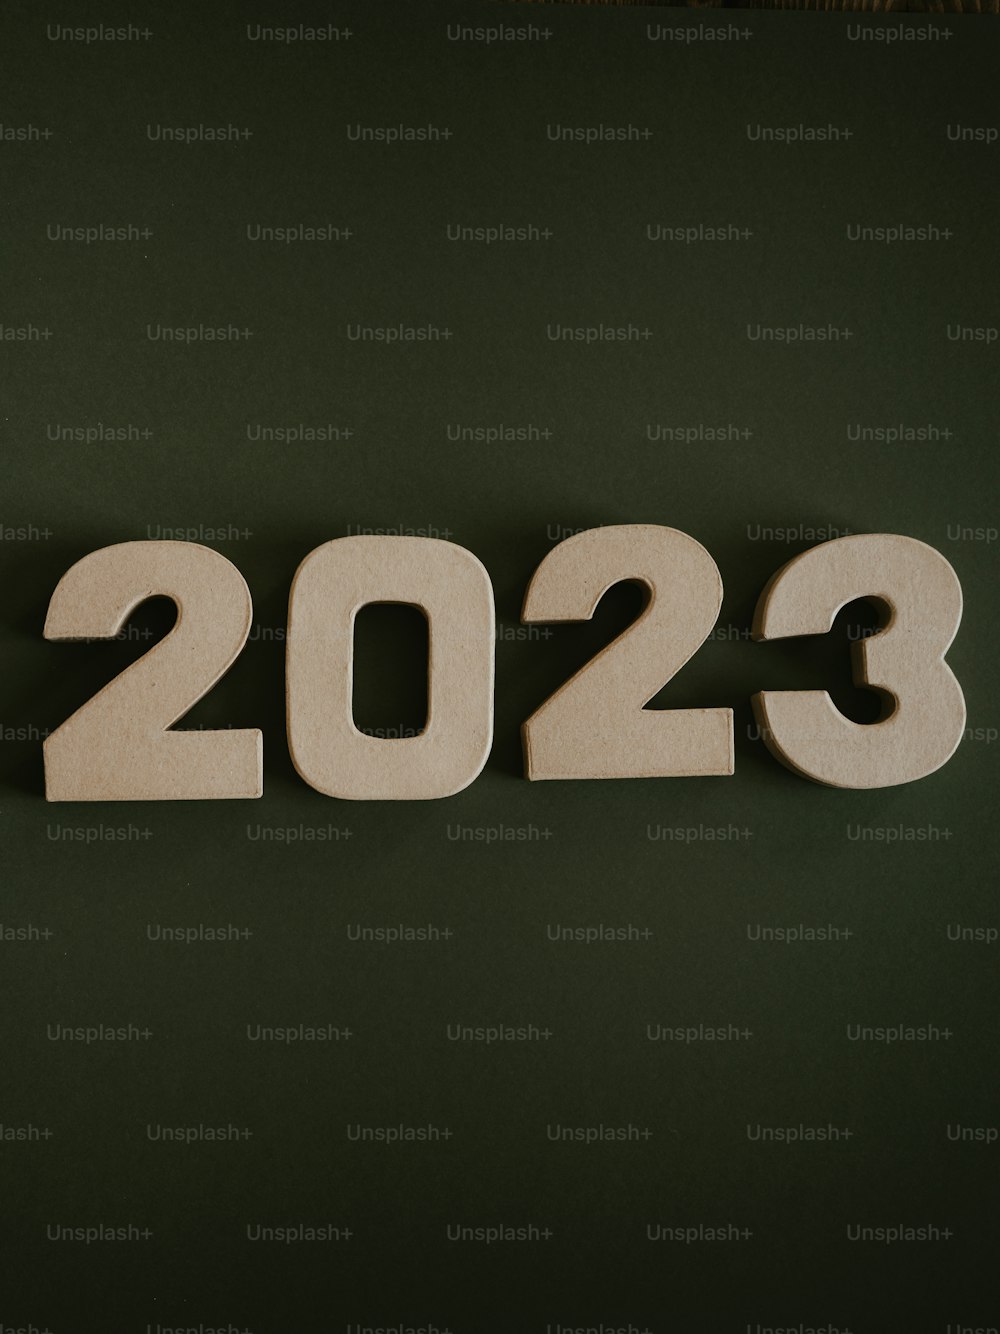 a number of wooden letters that spell out the year 2013 and 2013